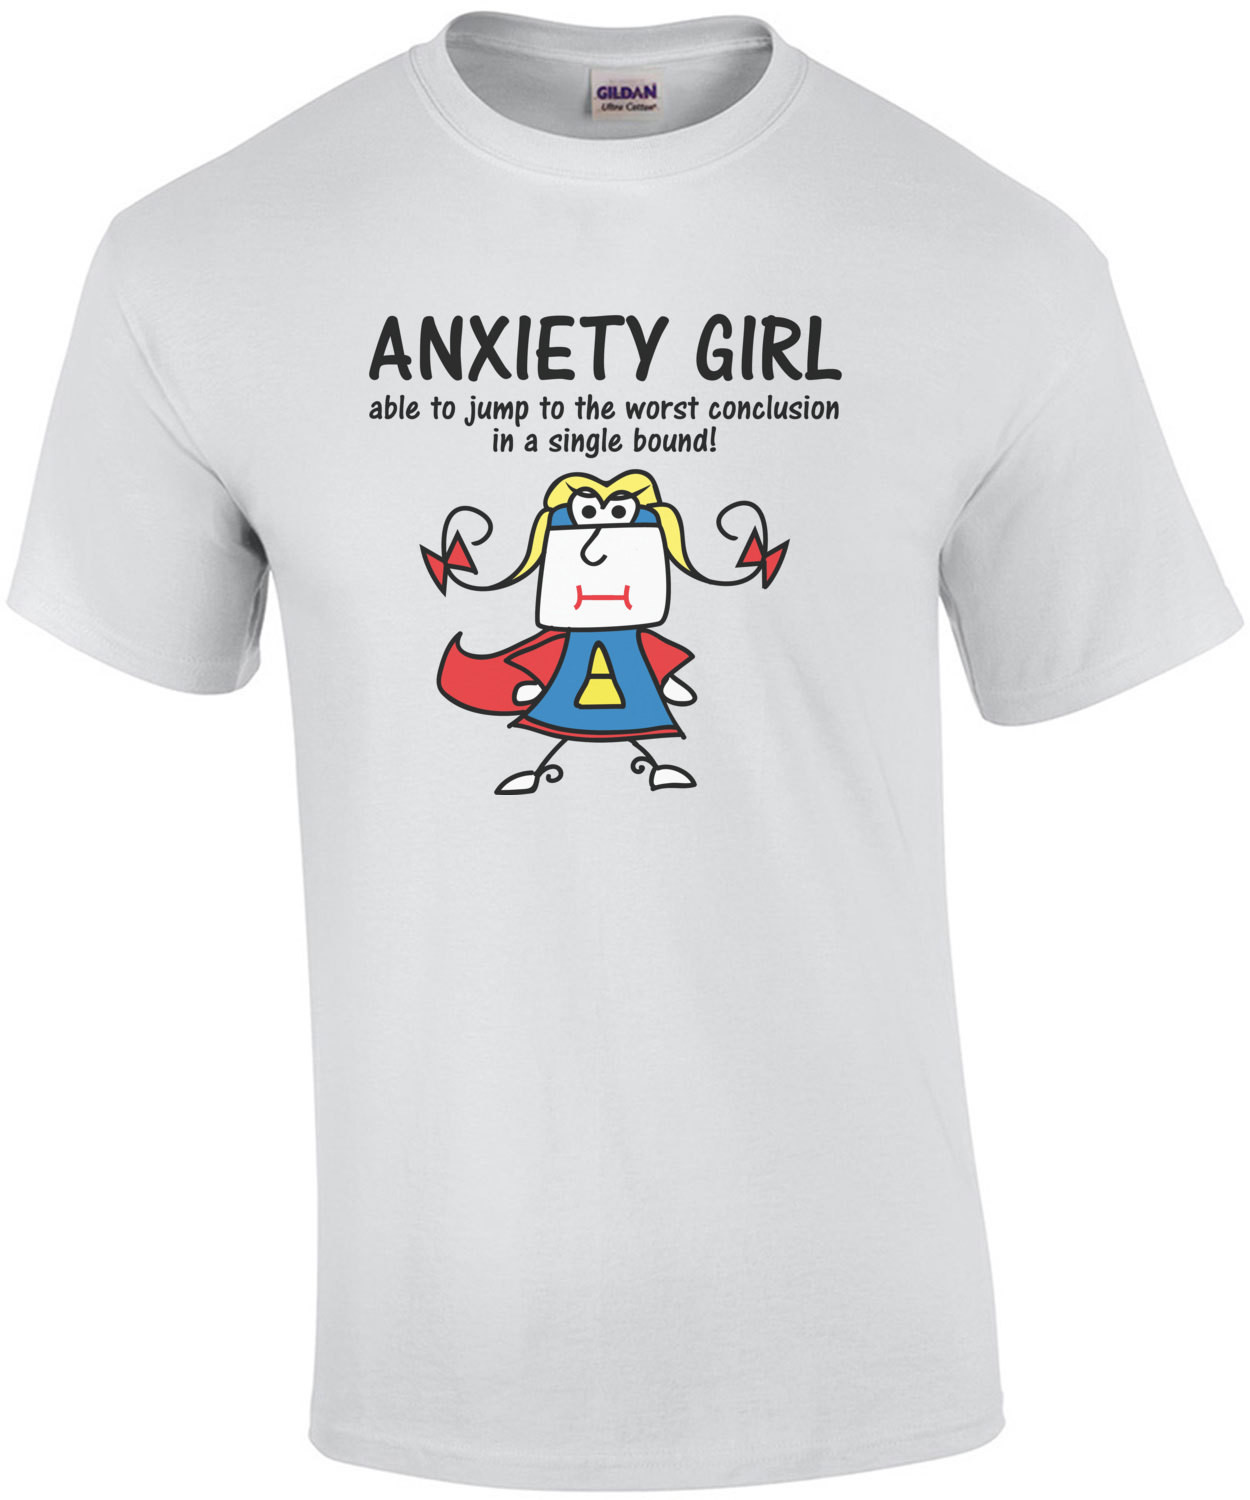 Anxiety girl - able to jump to the worst conclusion in a single bound! - Funny T-Shirt